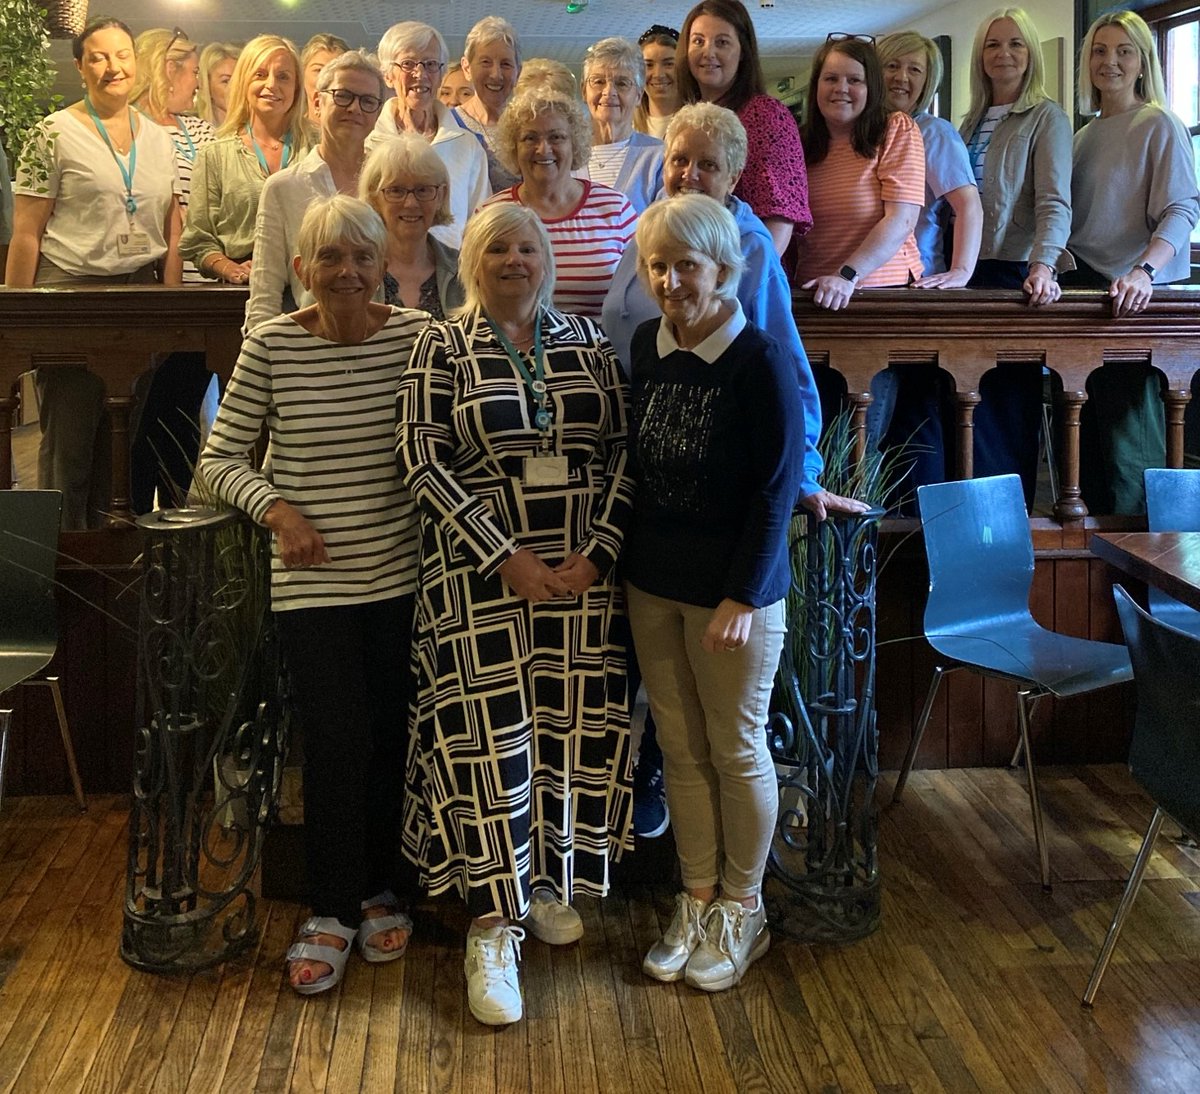 Our #teamNORTH Causeway health visitors have enjoyed a coffee morning with Portstewart Baptist Church baby basics team who generously donate lots of useful items to new mums in the area including Moses baskets, baths & personal items.

Thank you for this invaluable support❤️